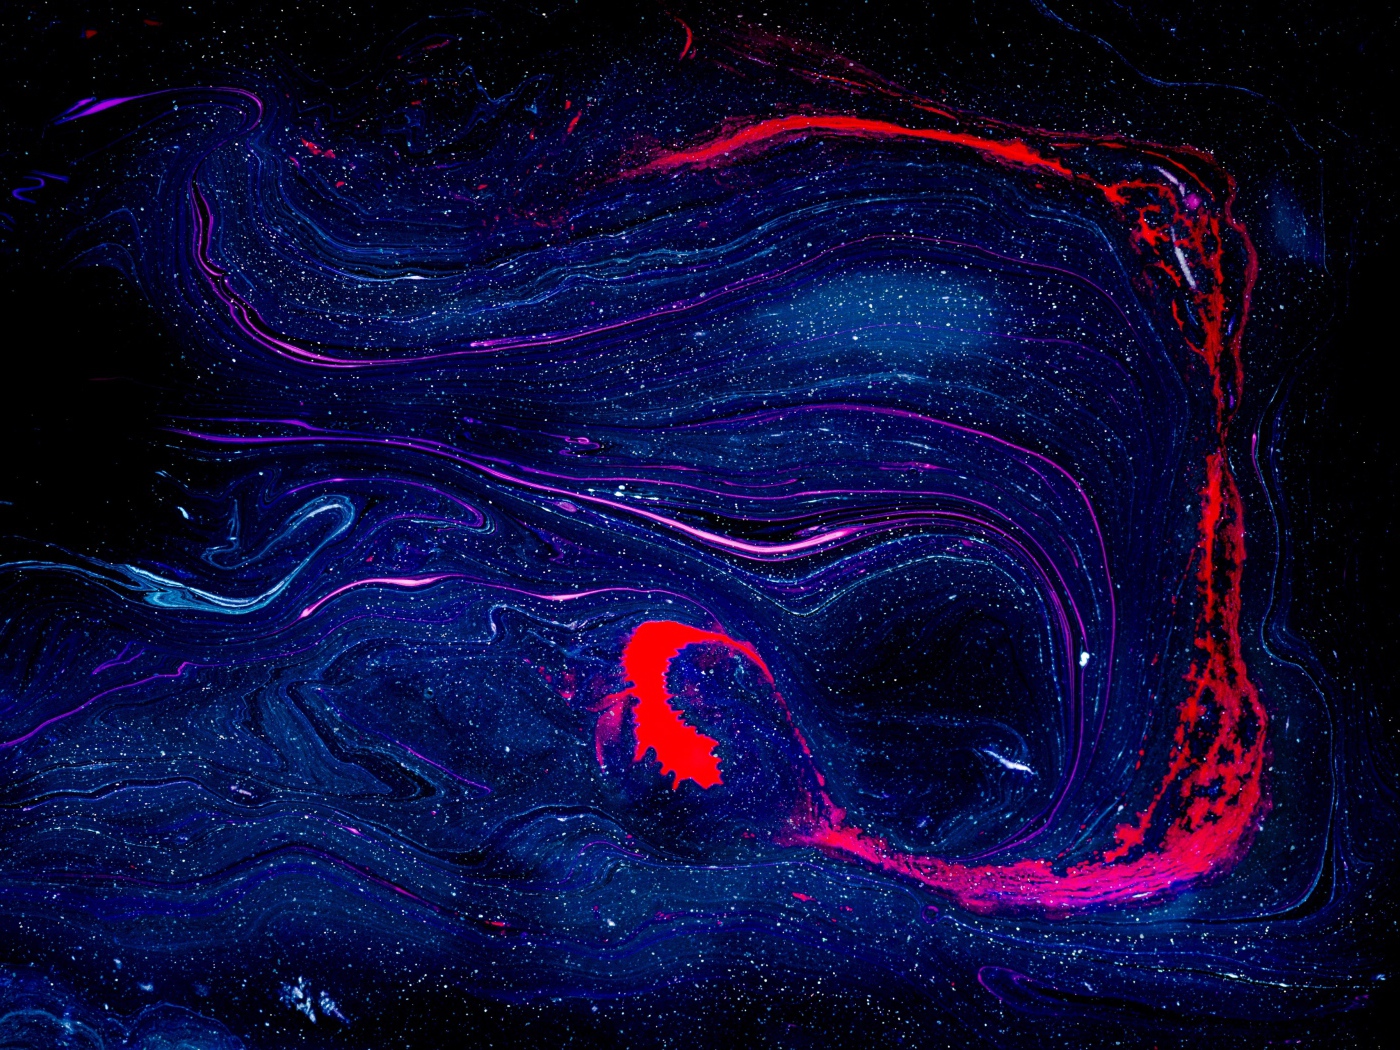 Blurry smudge of blue and red paint on black background